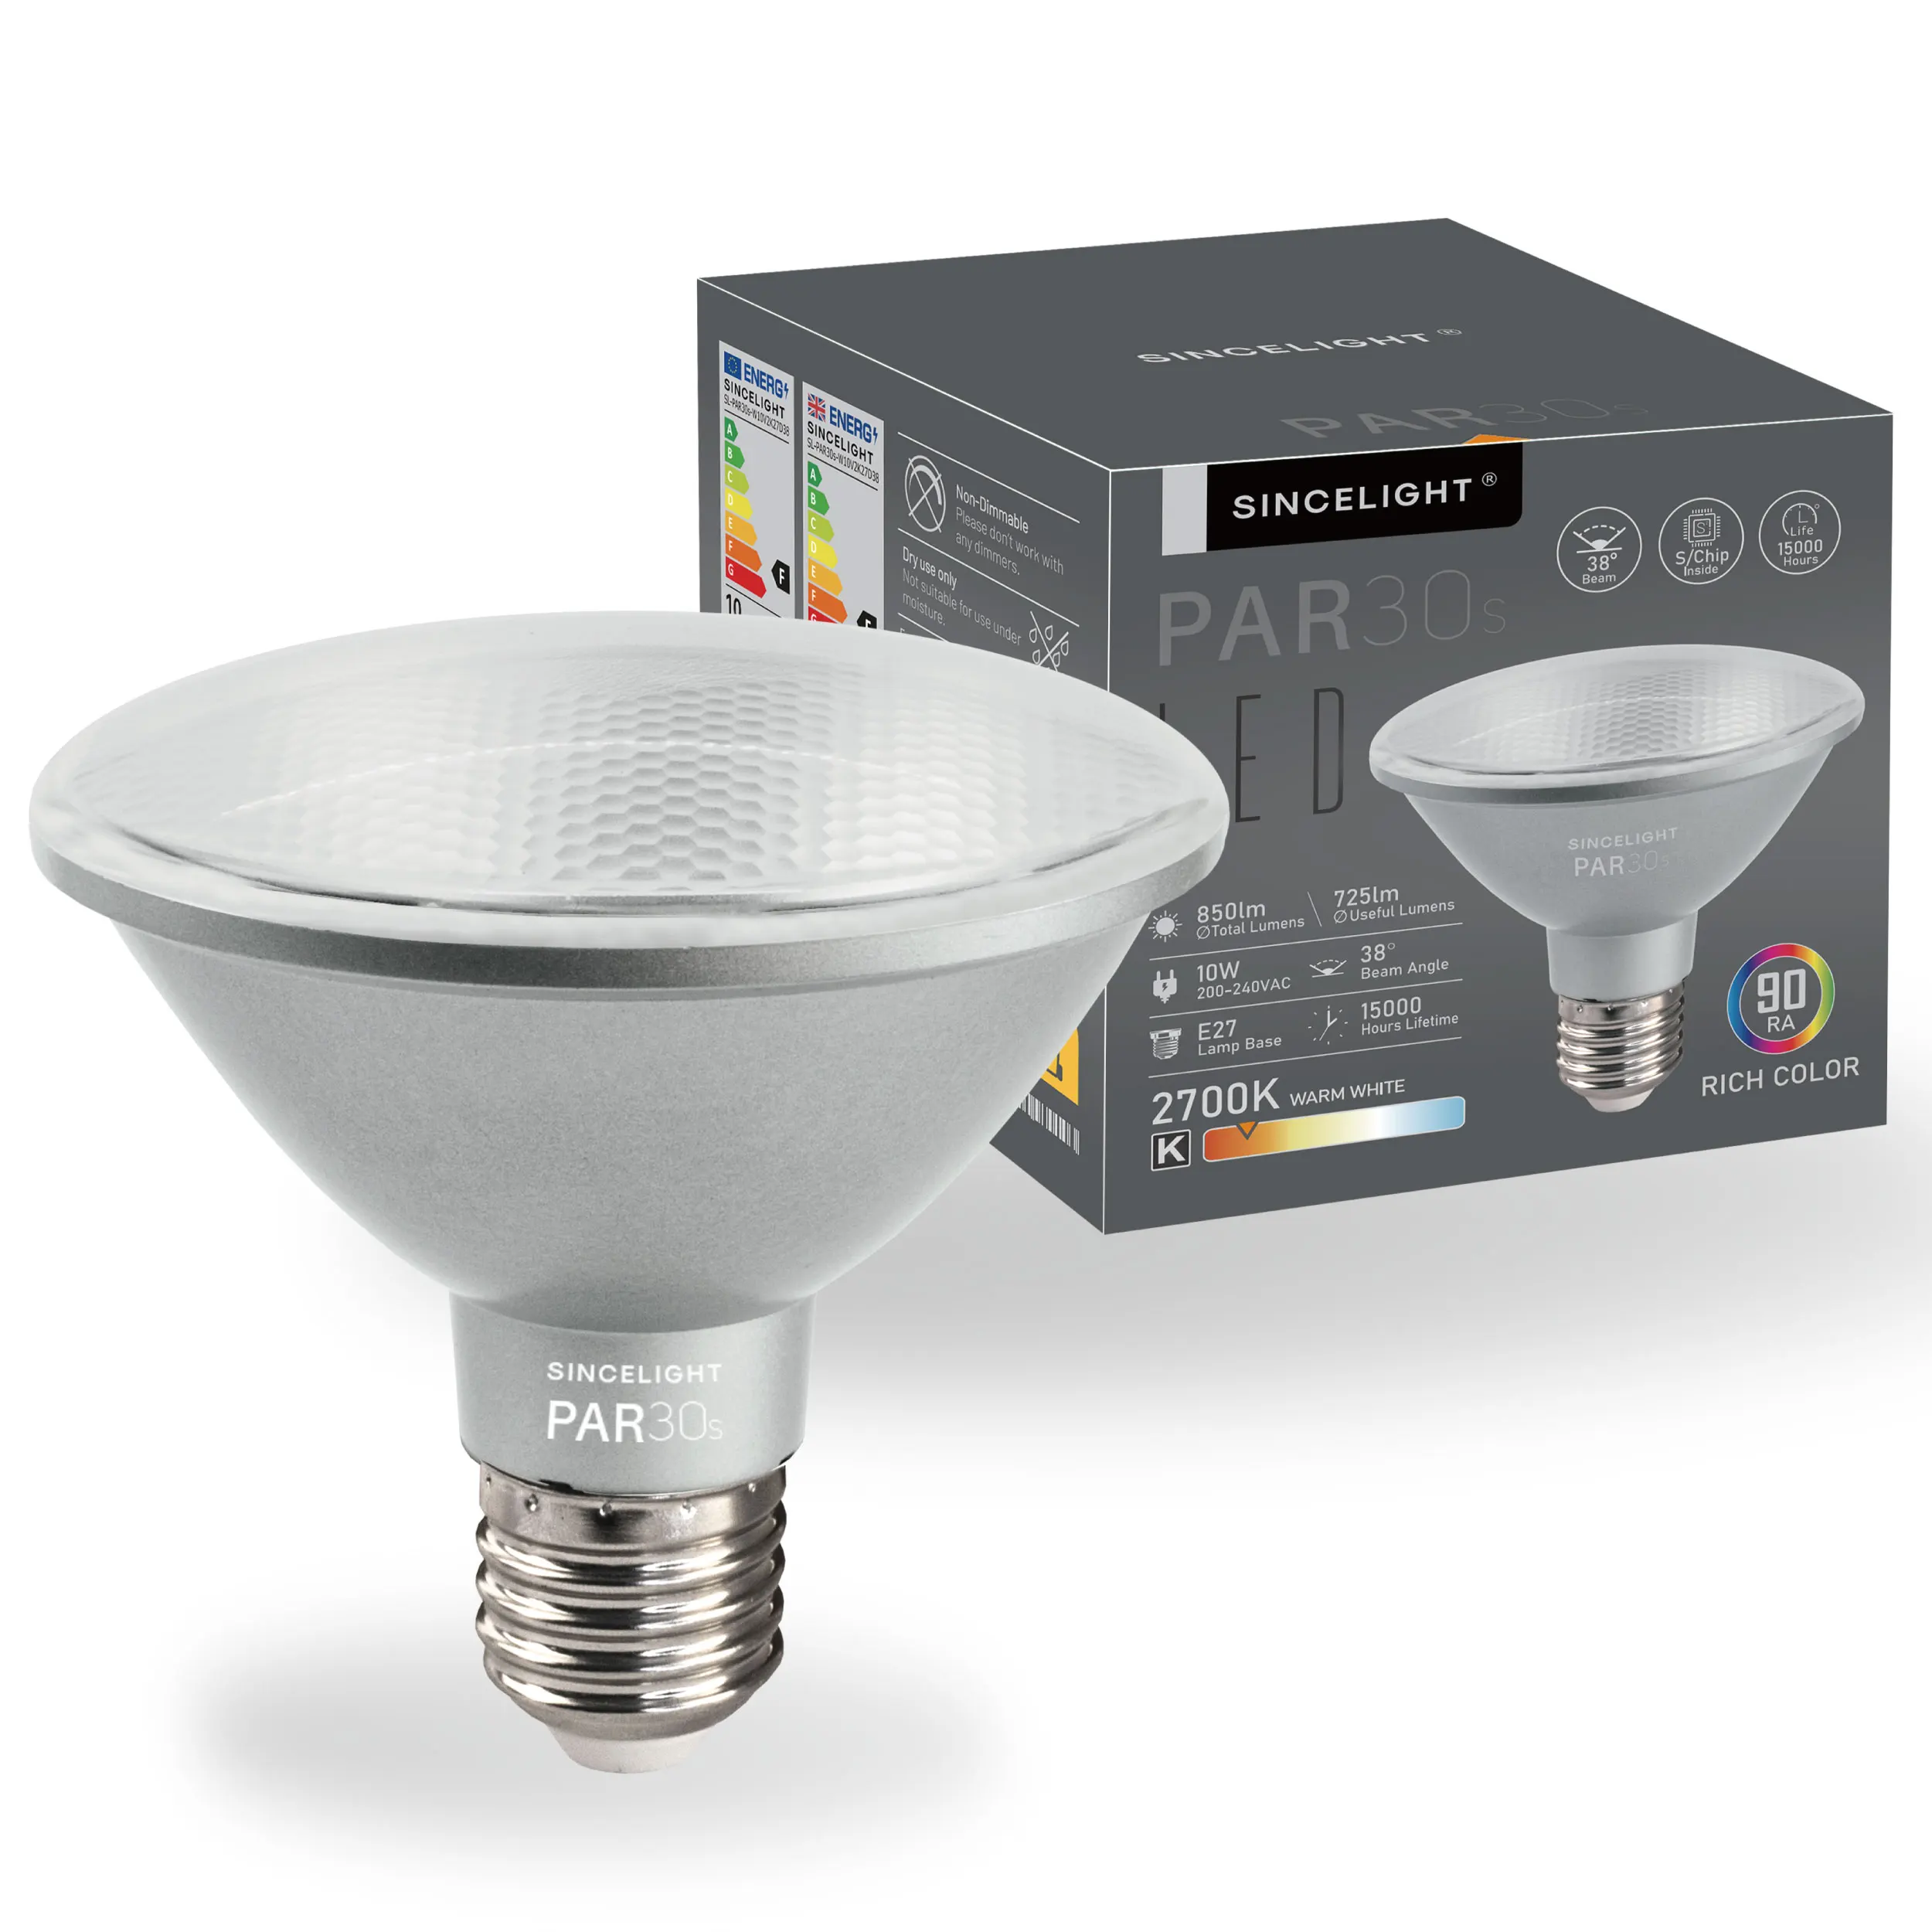 PAR30s LED Light Bulb with E27 Base, with 38° Optical Reflector, 10W, Rich Color RA≈90, 850 Lumens Equivalent to 85W Halogen